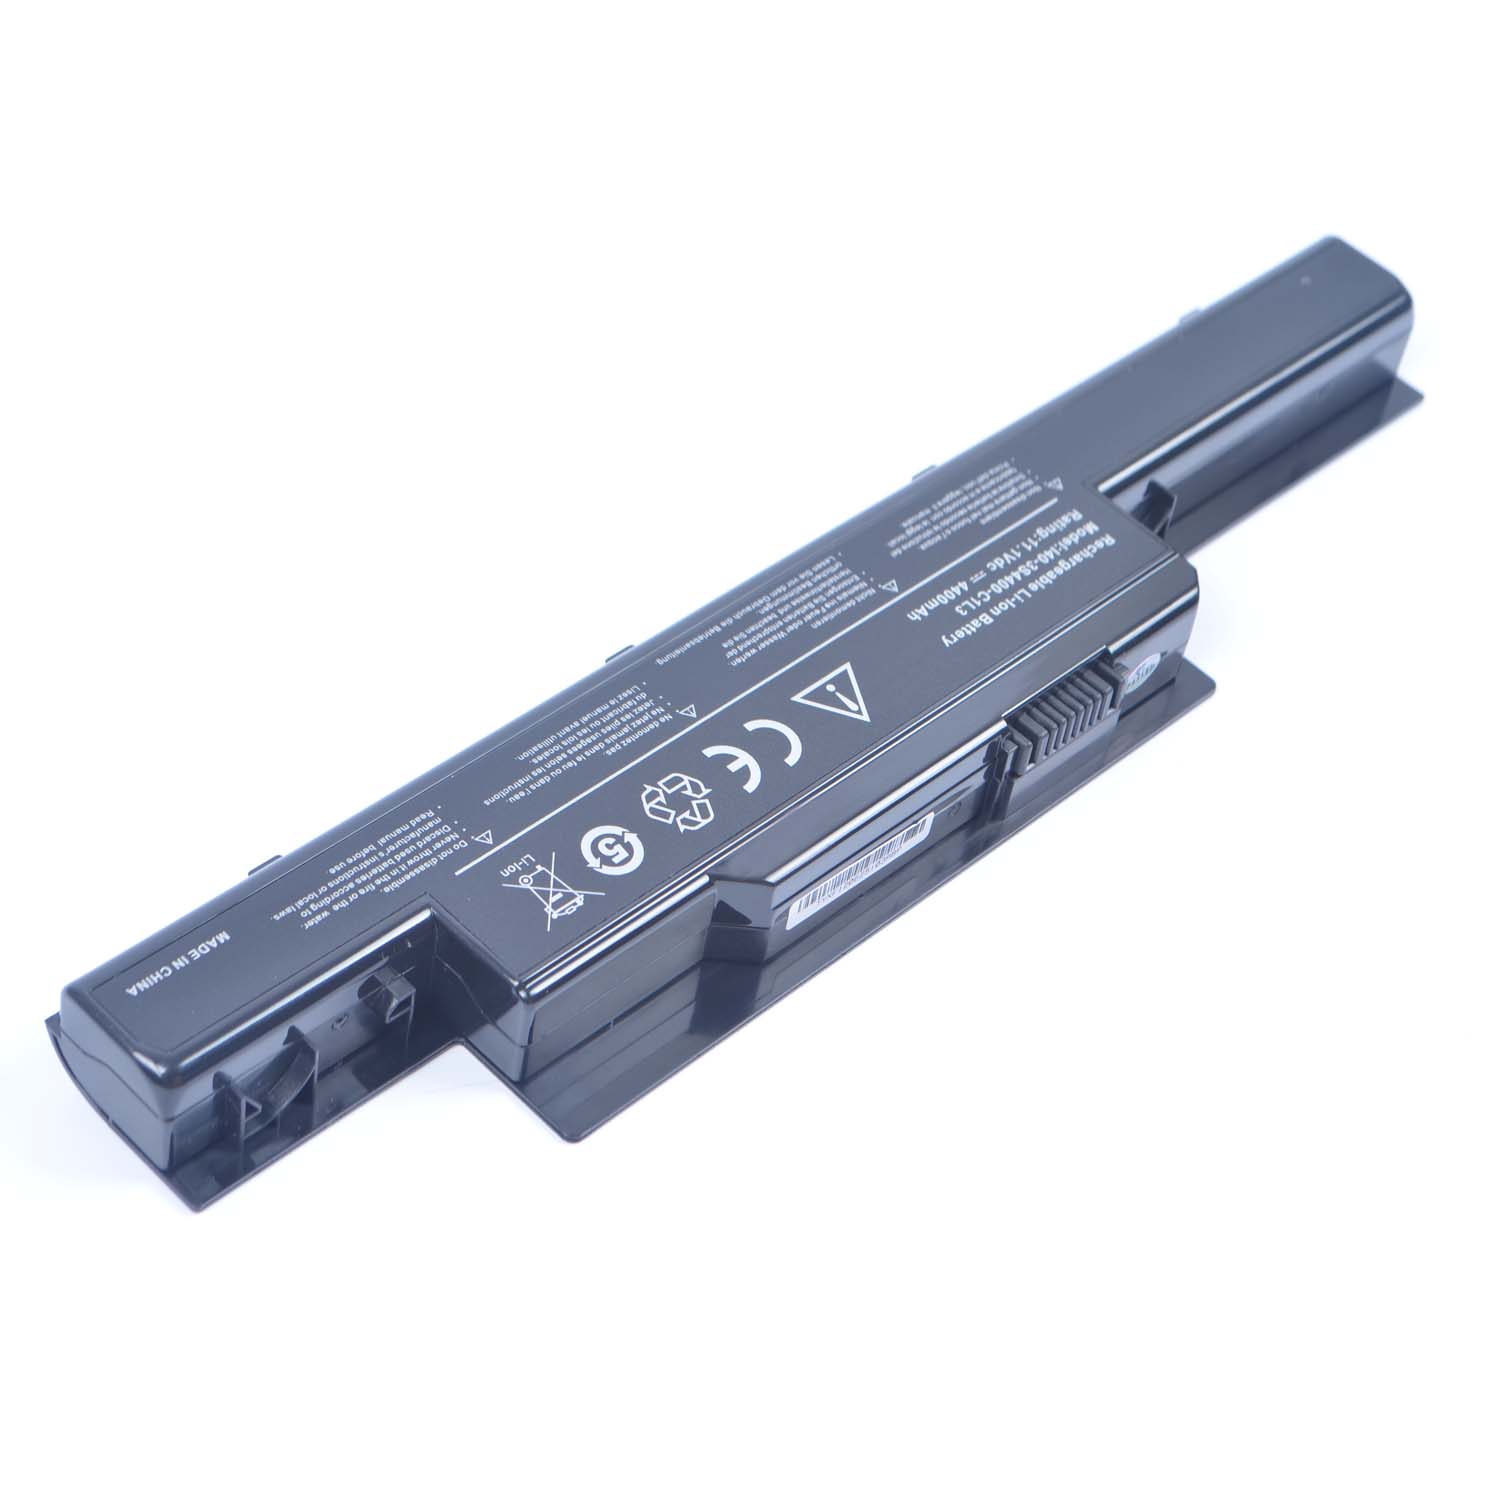 Replacement Battery for FOUNDER FOUNDER R410IU battery